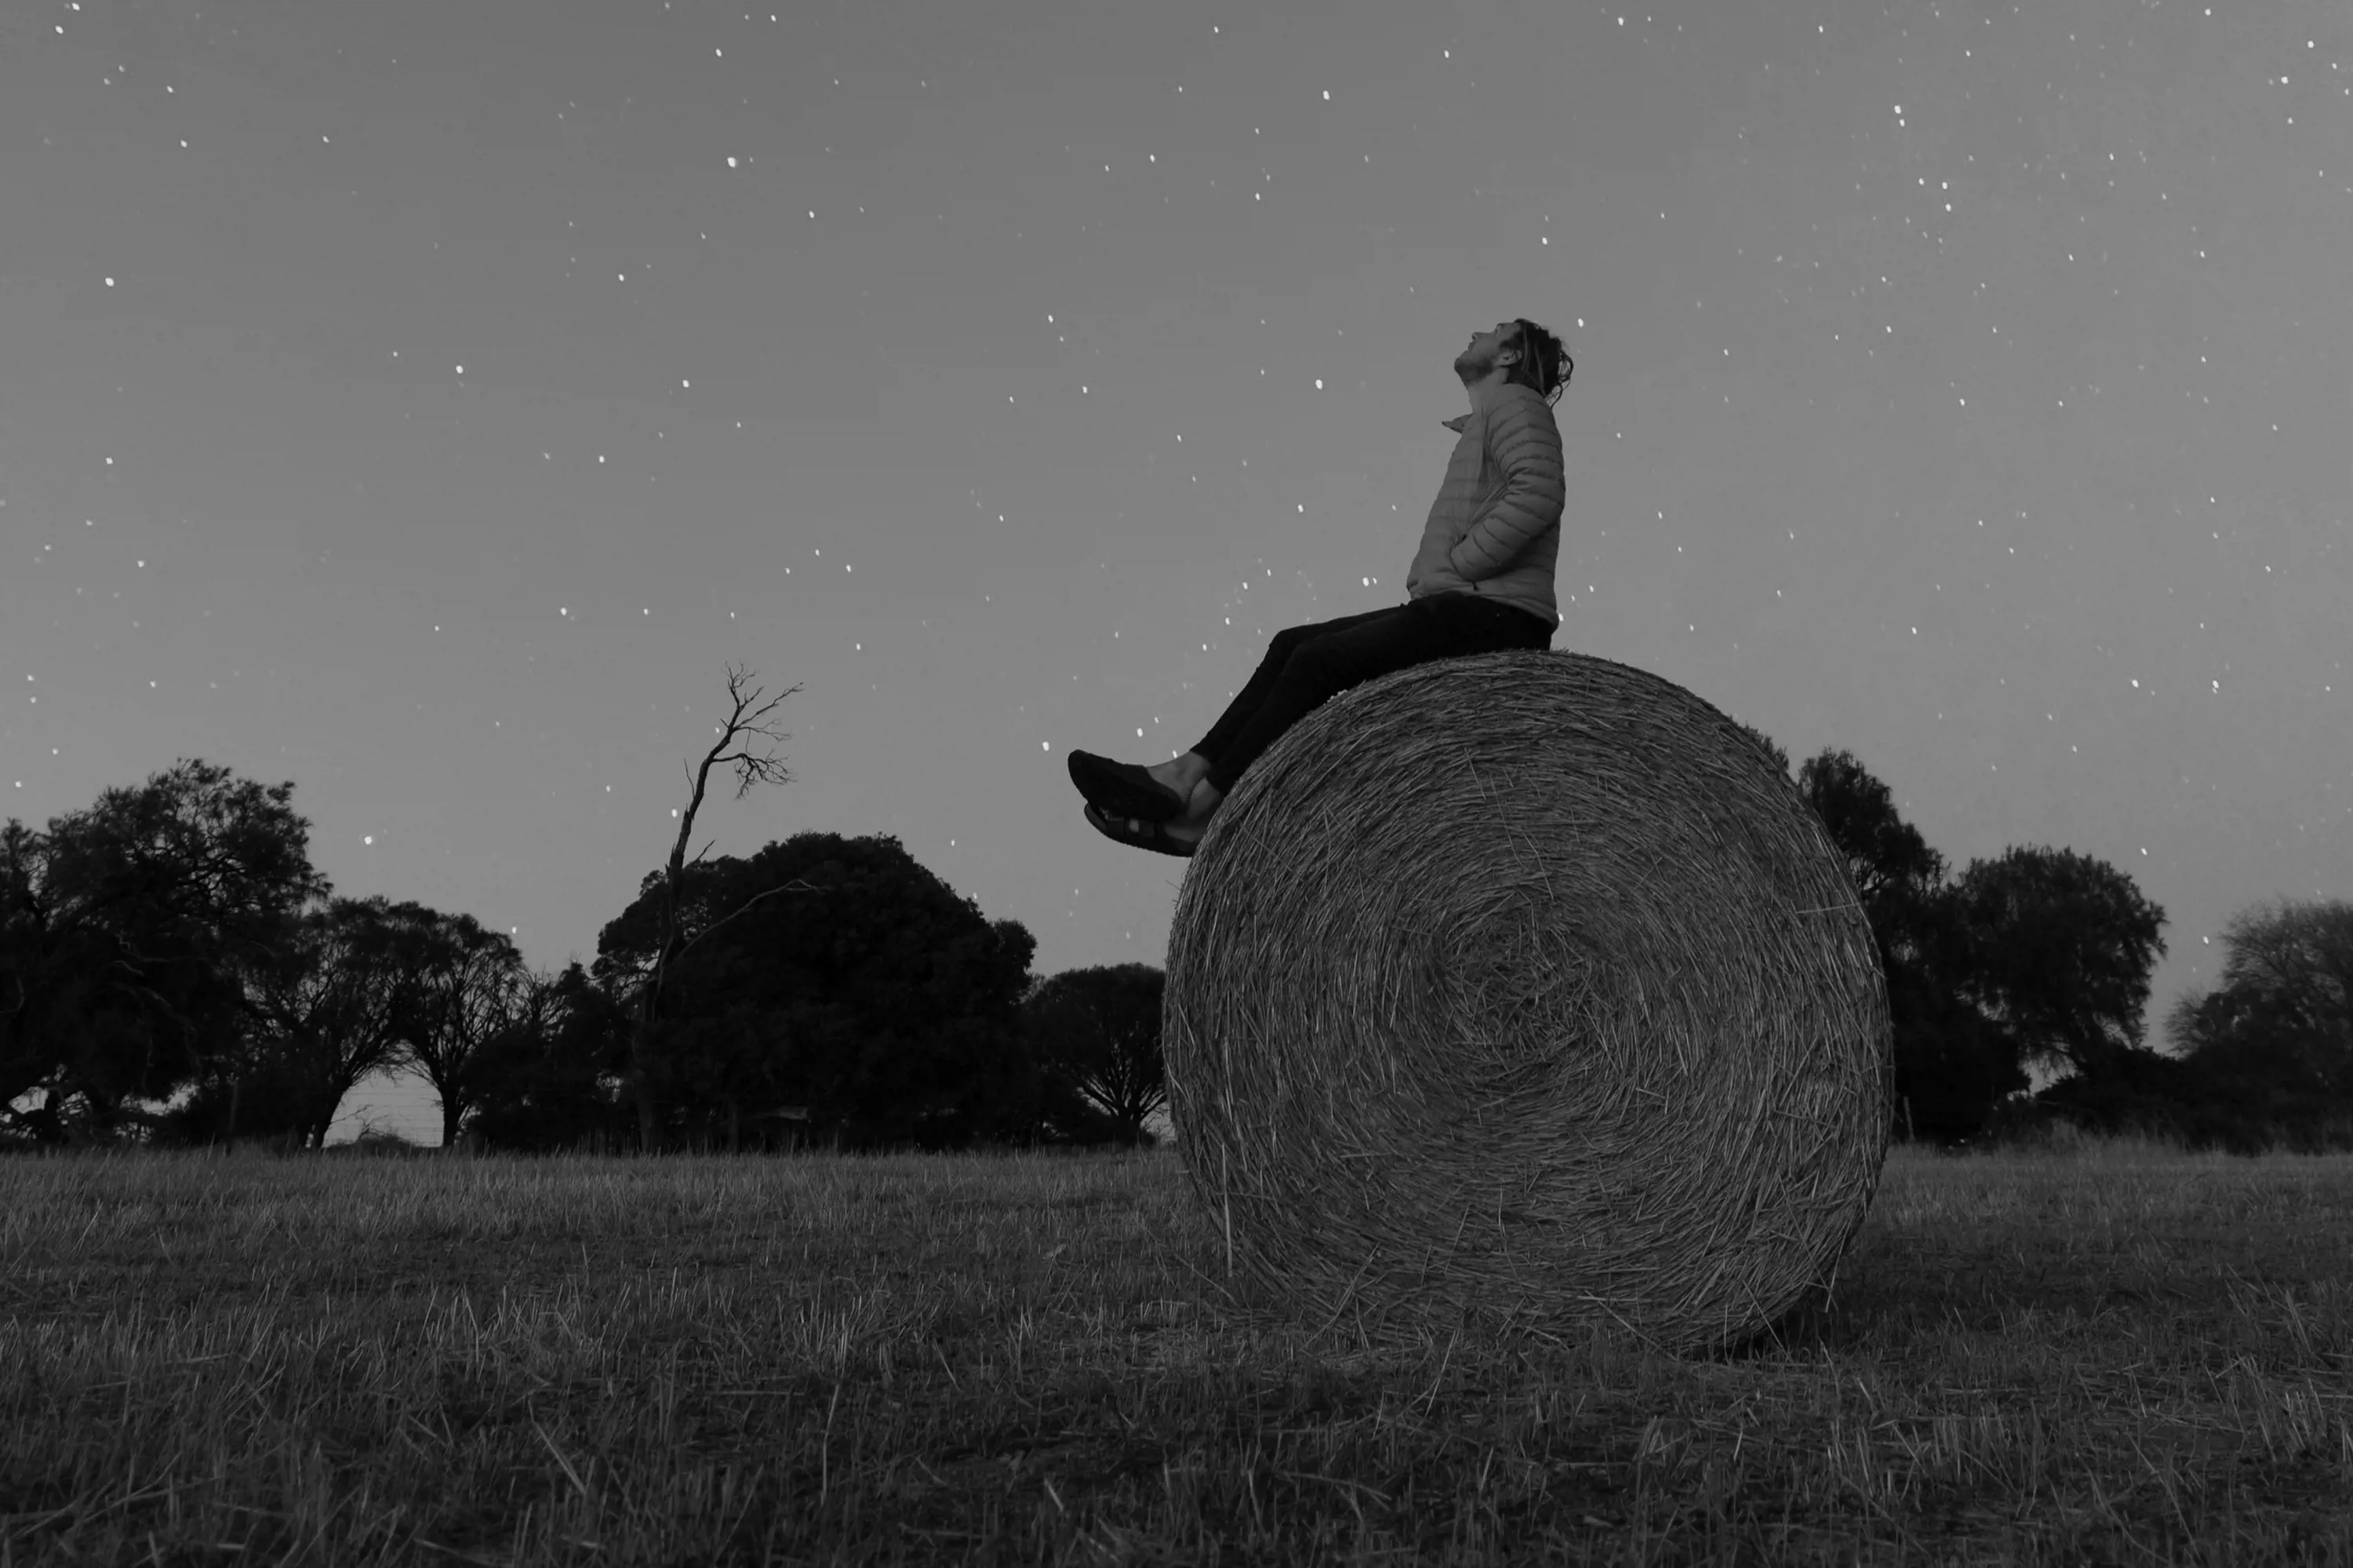 A man wearing a winter jacket sits on the top of a large cylindrical-shaped hay bale and looks up to the stars on a clear night.